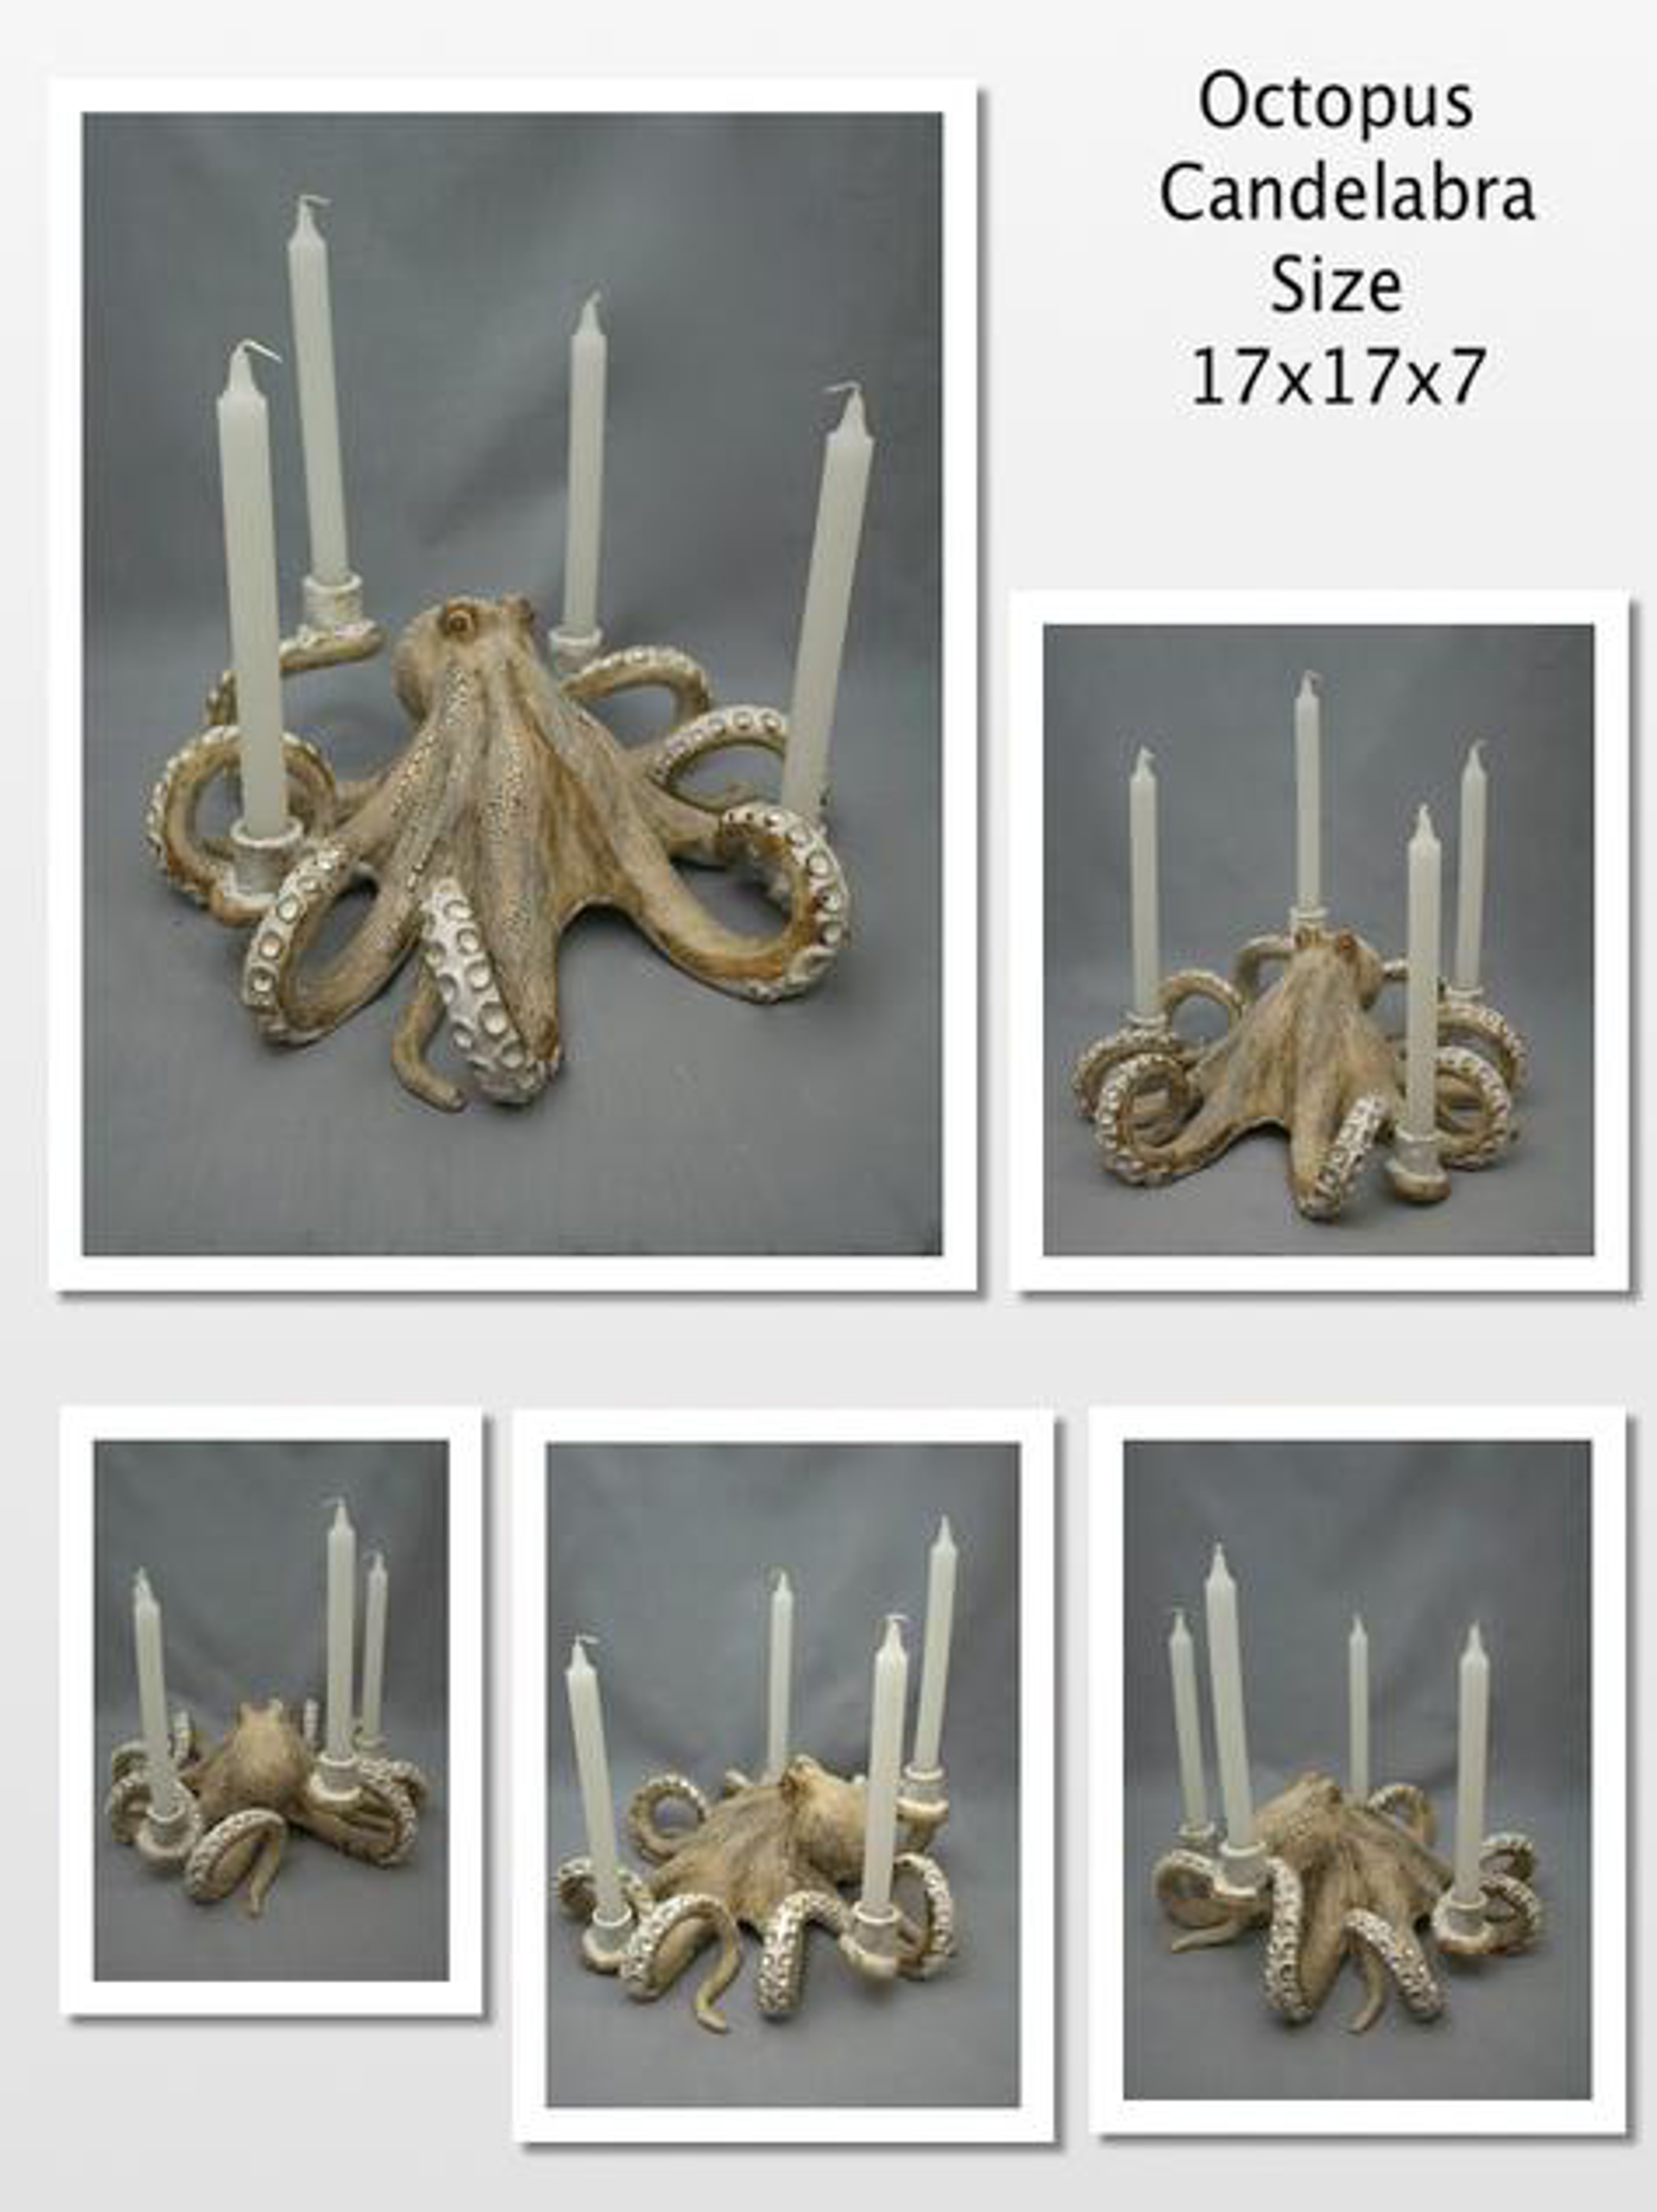 Octopus Candleabra by Shayne Greco